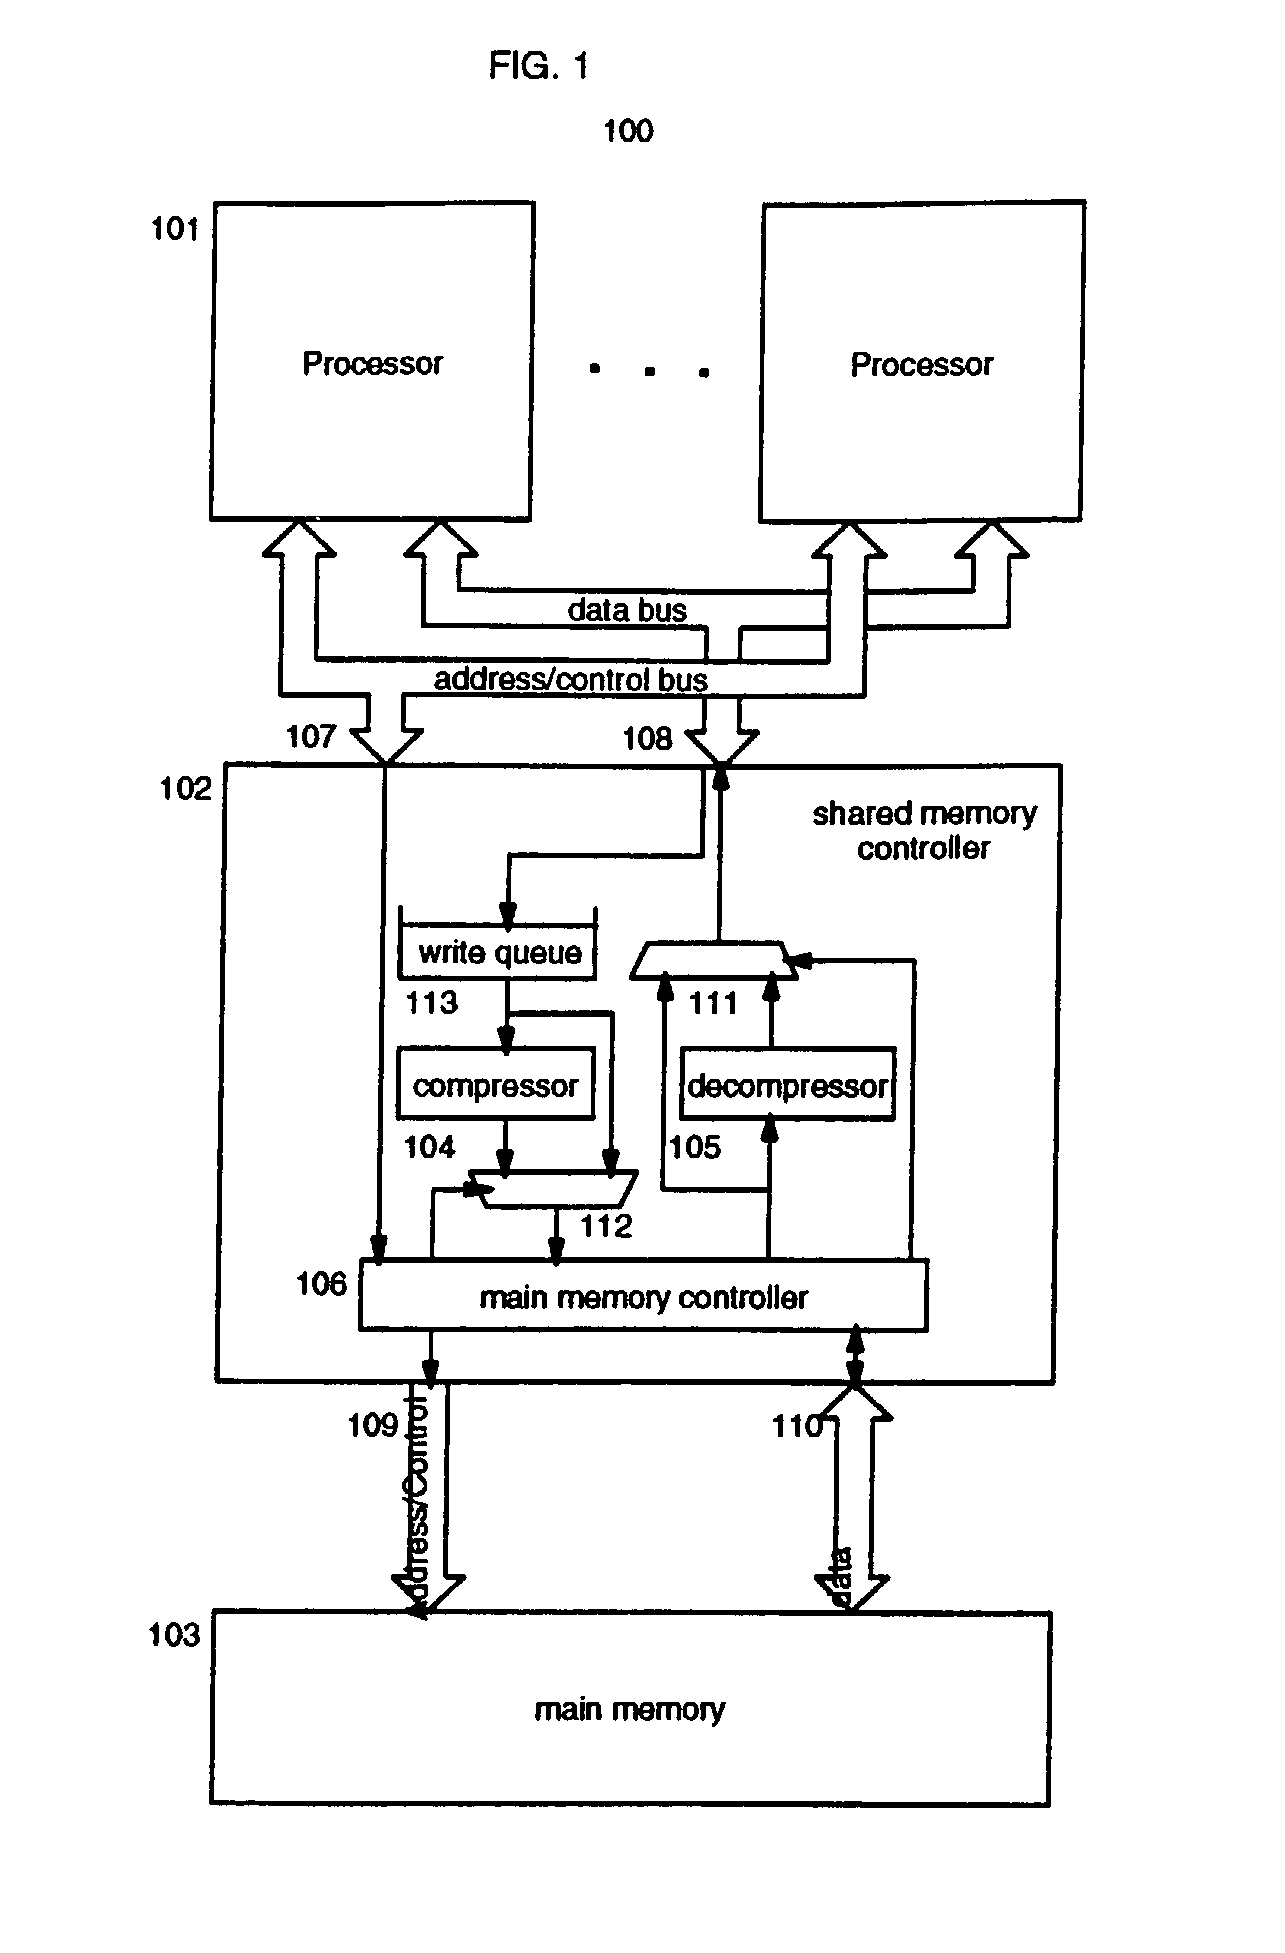 System and method for using a compressed main memory based on degree of compressibility